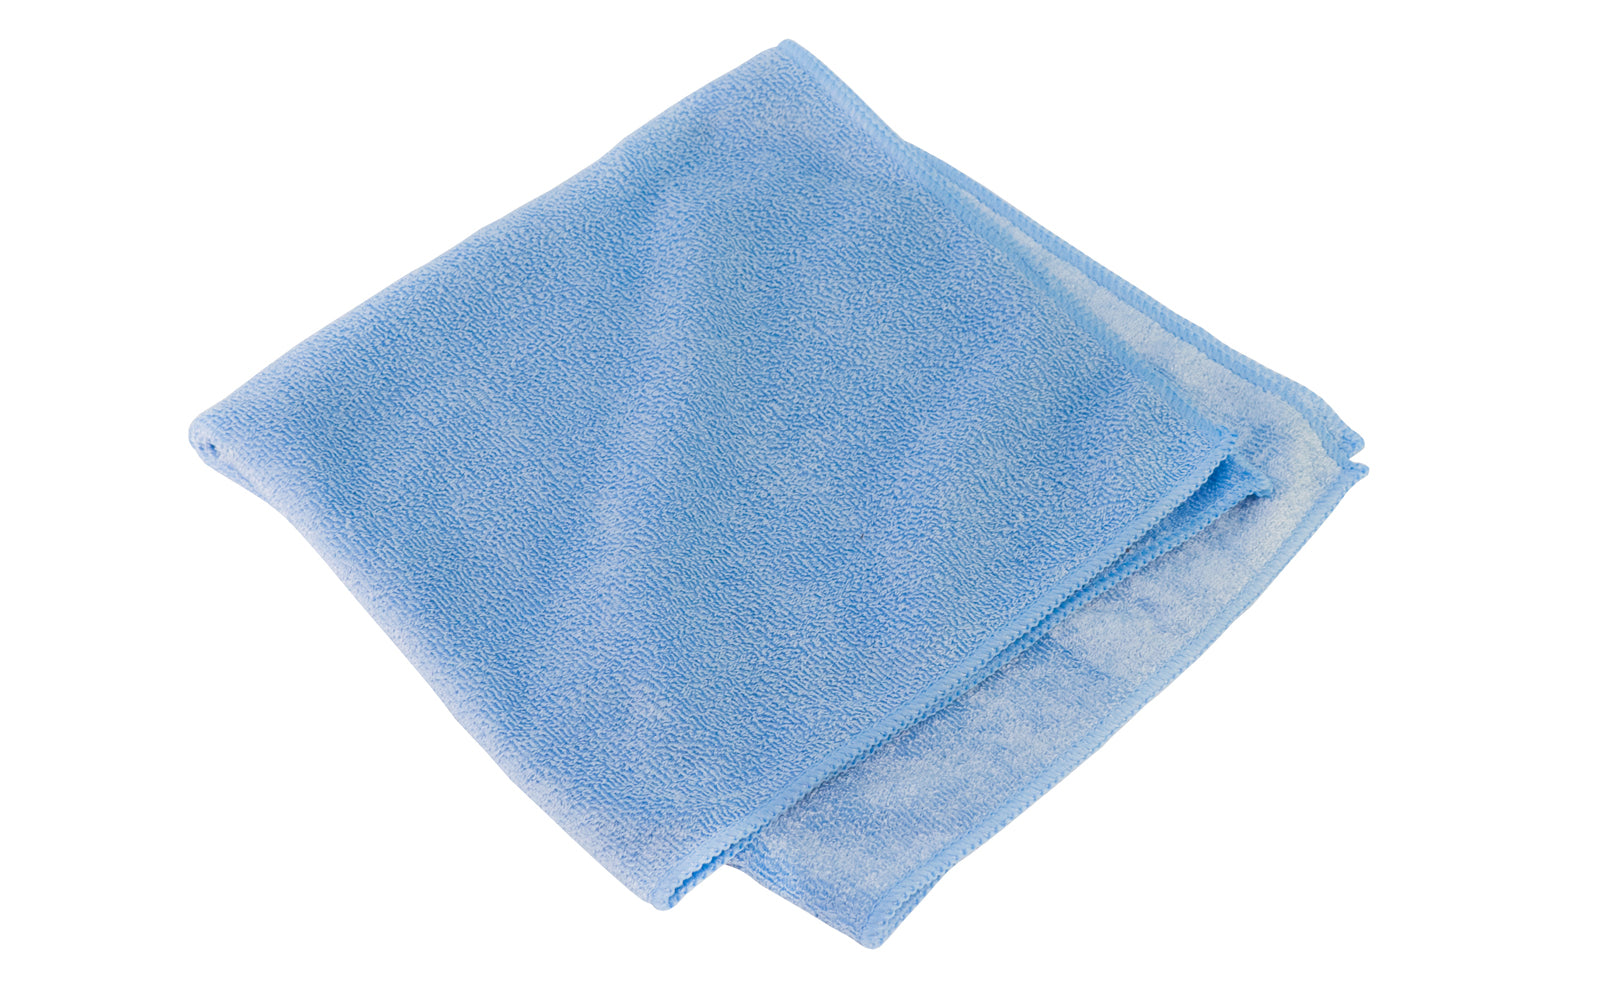 Norton 16" x 16" Micro Fiber Cloth - Wet Cleaning (Blue). Attracts & traps smallest particles - Hypo allergenic. Washable & reusable. 70% polyester / 30% polyamide.   Made by Norton Abrasives, St. Gobain. Model No. 05300.